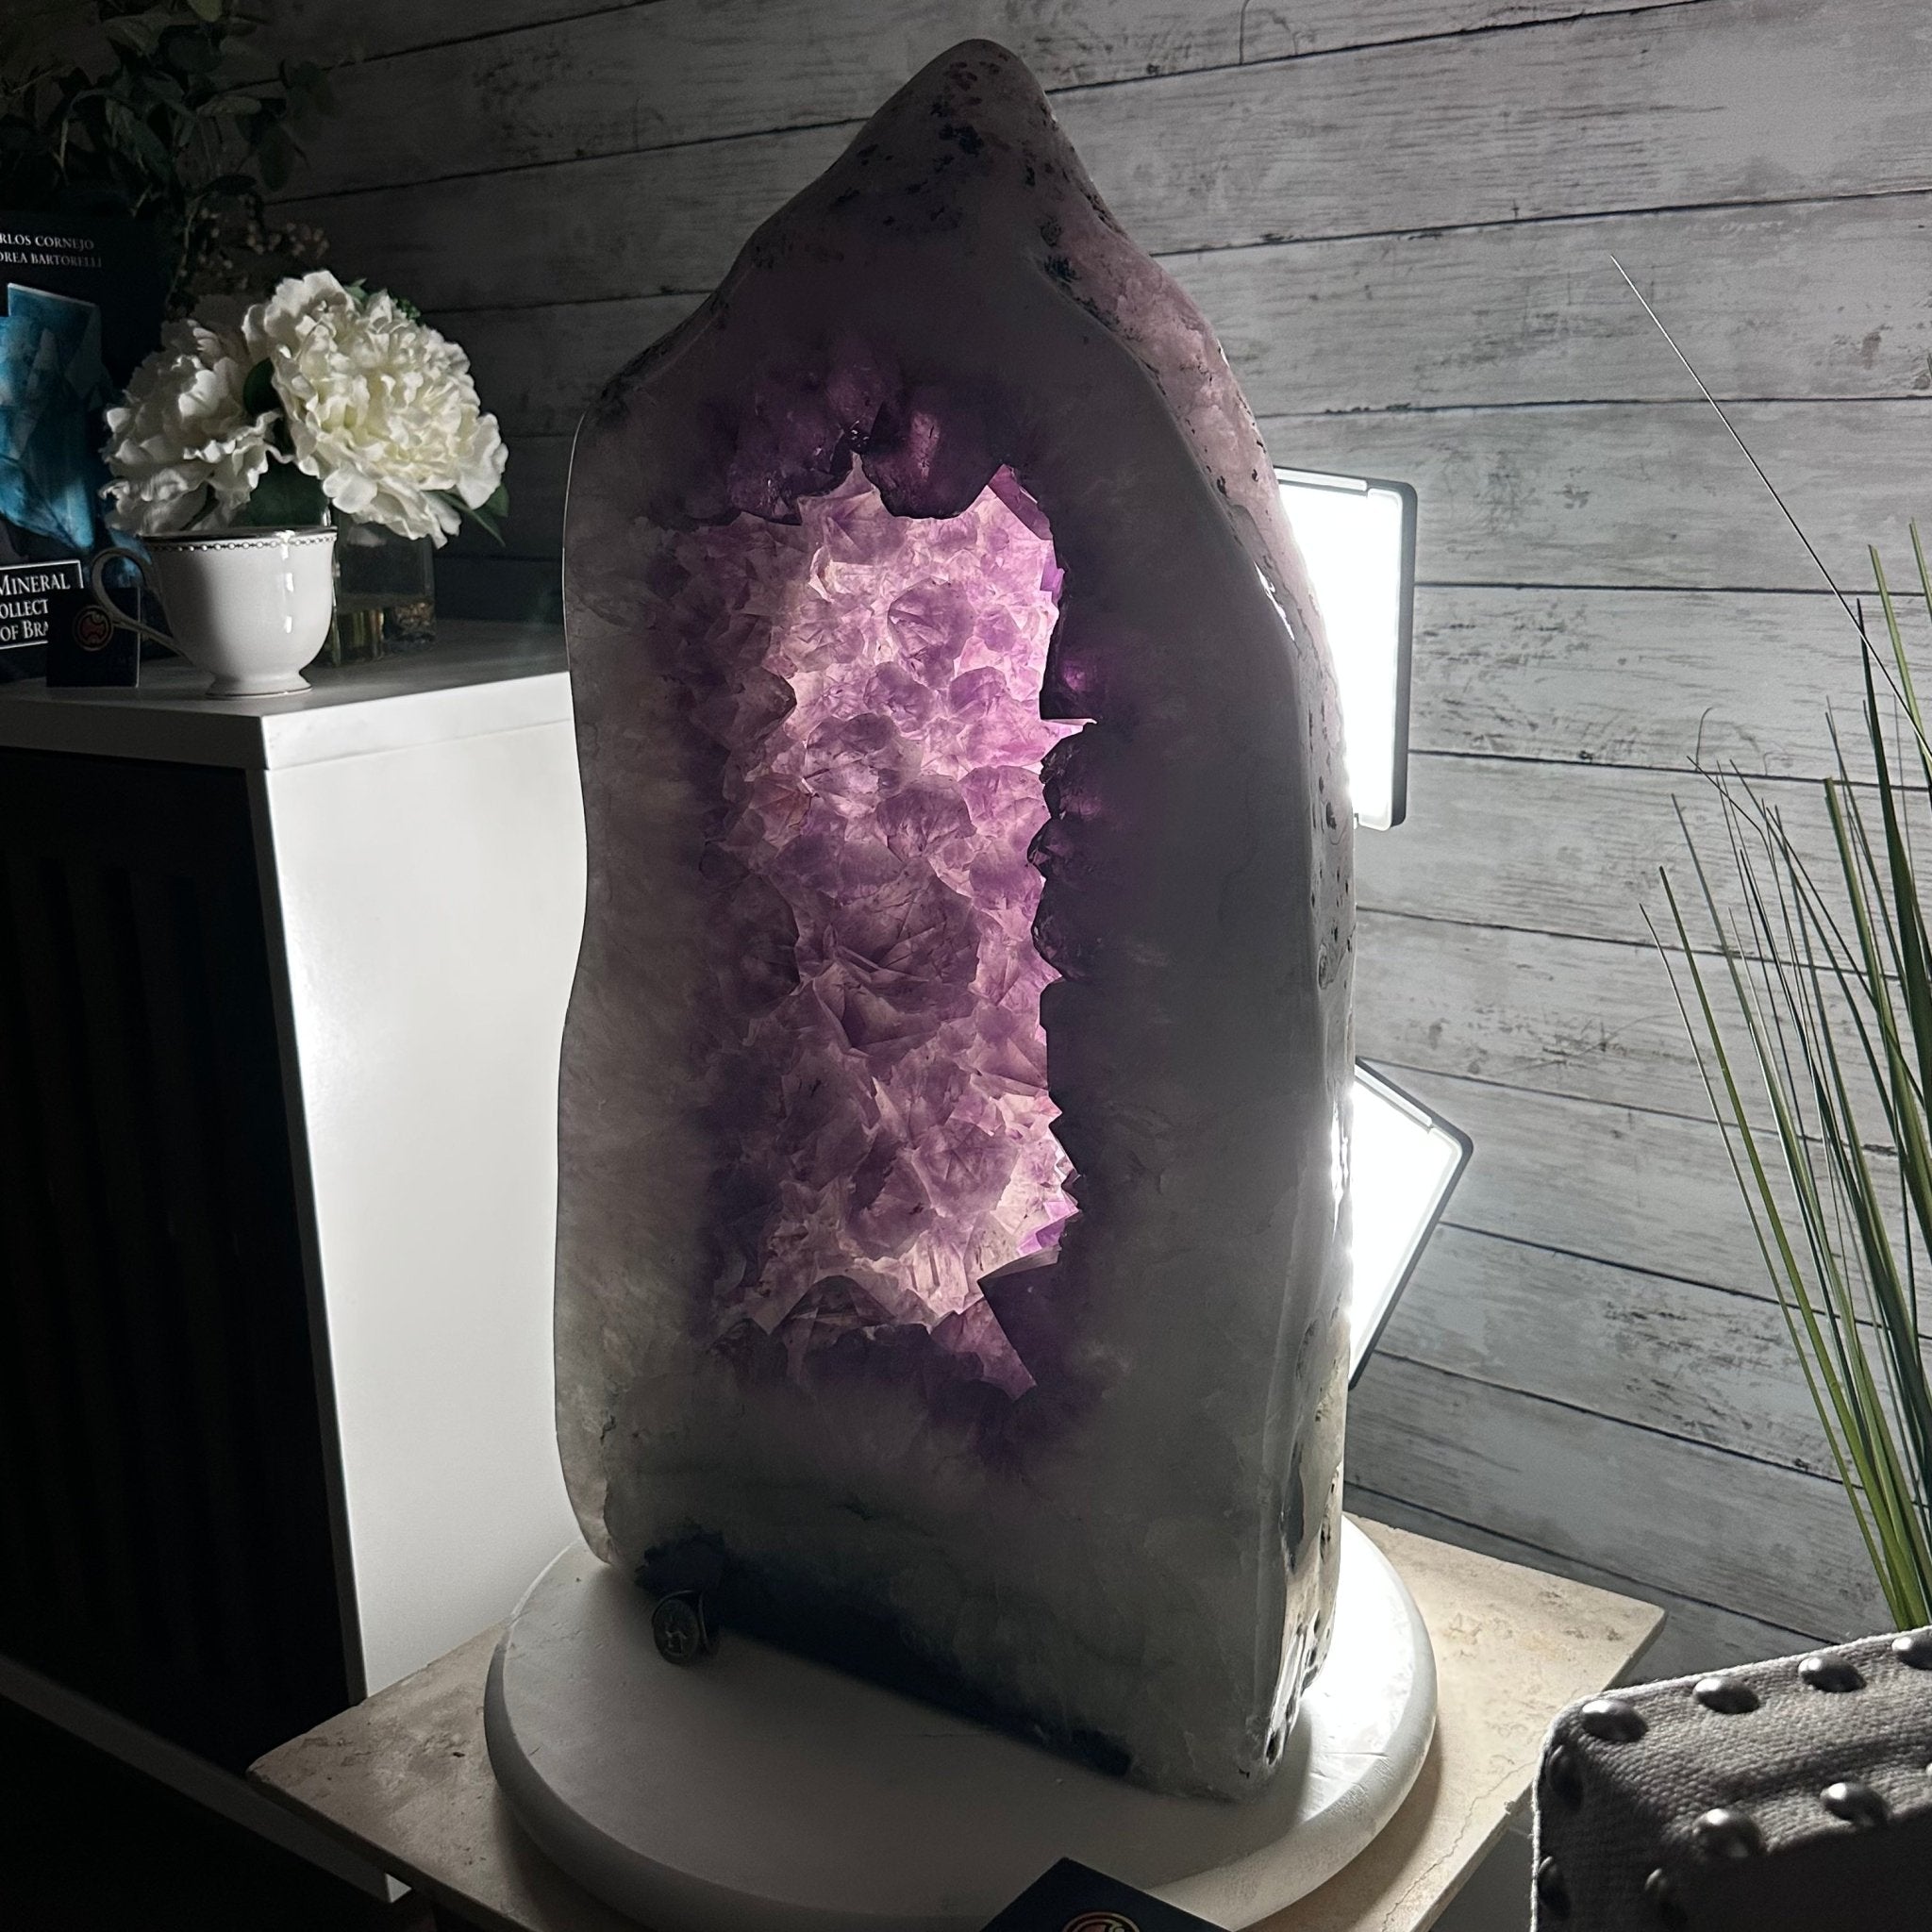 Extra Quality Polished Brazilian Amethyst Cathedral, 106.6 lbs & 23.75" tall Model #5602-0030 by Brazil Gems - Brazil GemsBrazil GemsExtra Quality Polished Brazilian Amethyst Cathedral, 106.6 lbs & 23.75" tall Model #5602-0030 by Brazil GemsPolished Cathedrals5602-0030